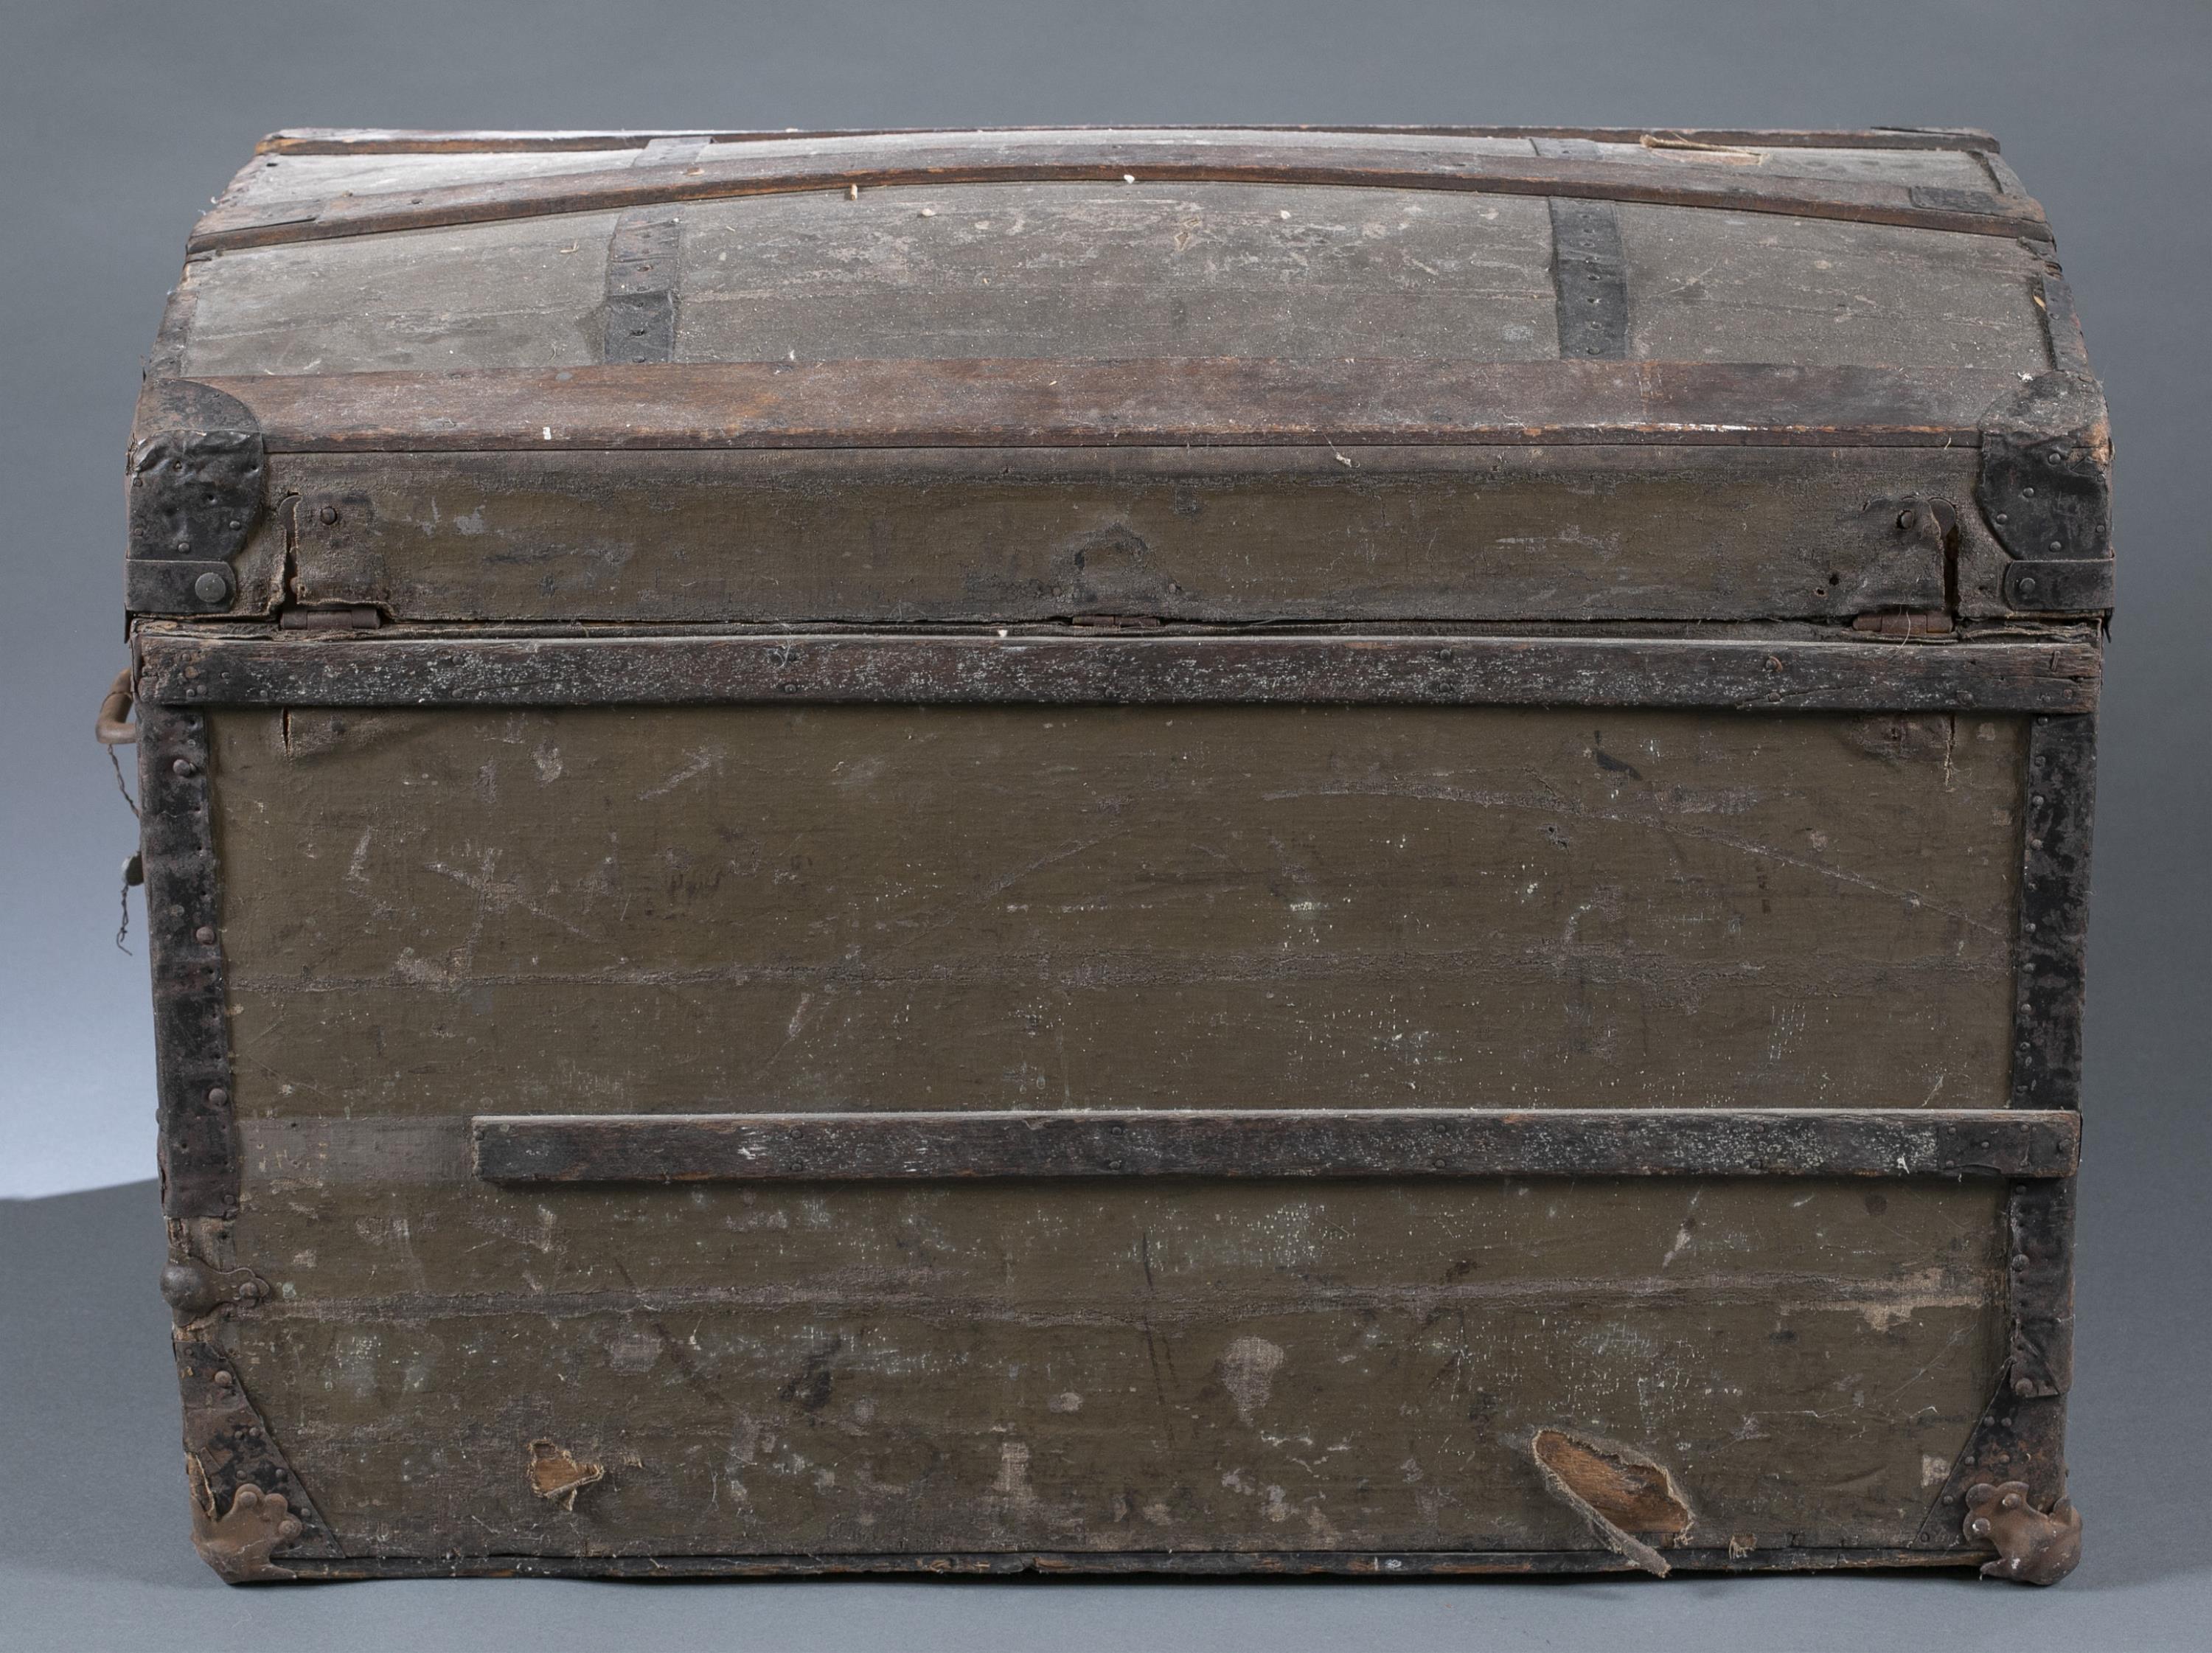 Louis Vuitton, "Trianon" trunk, 1860's. - Image 7 of 8